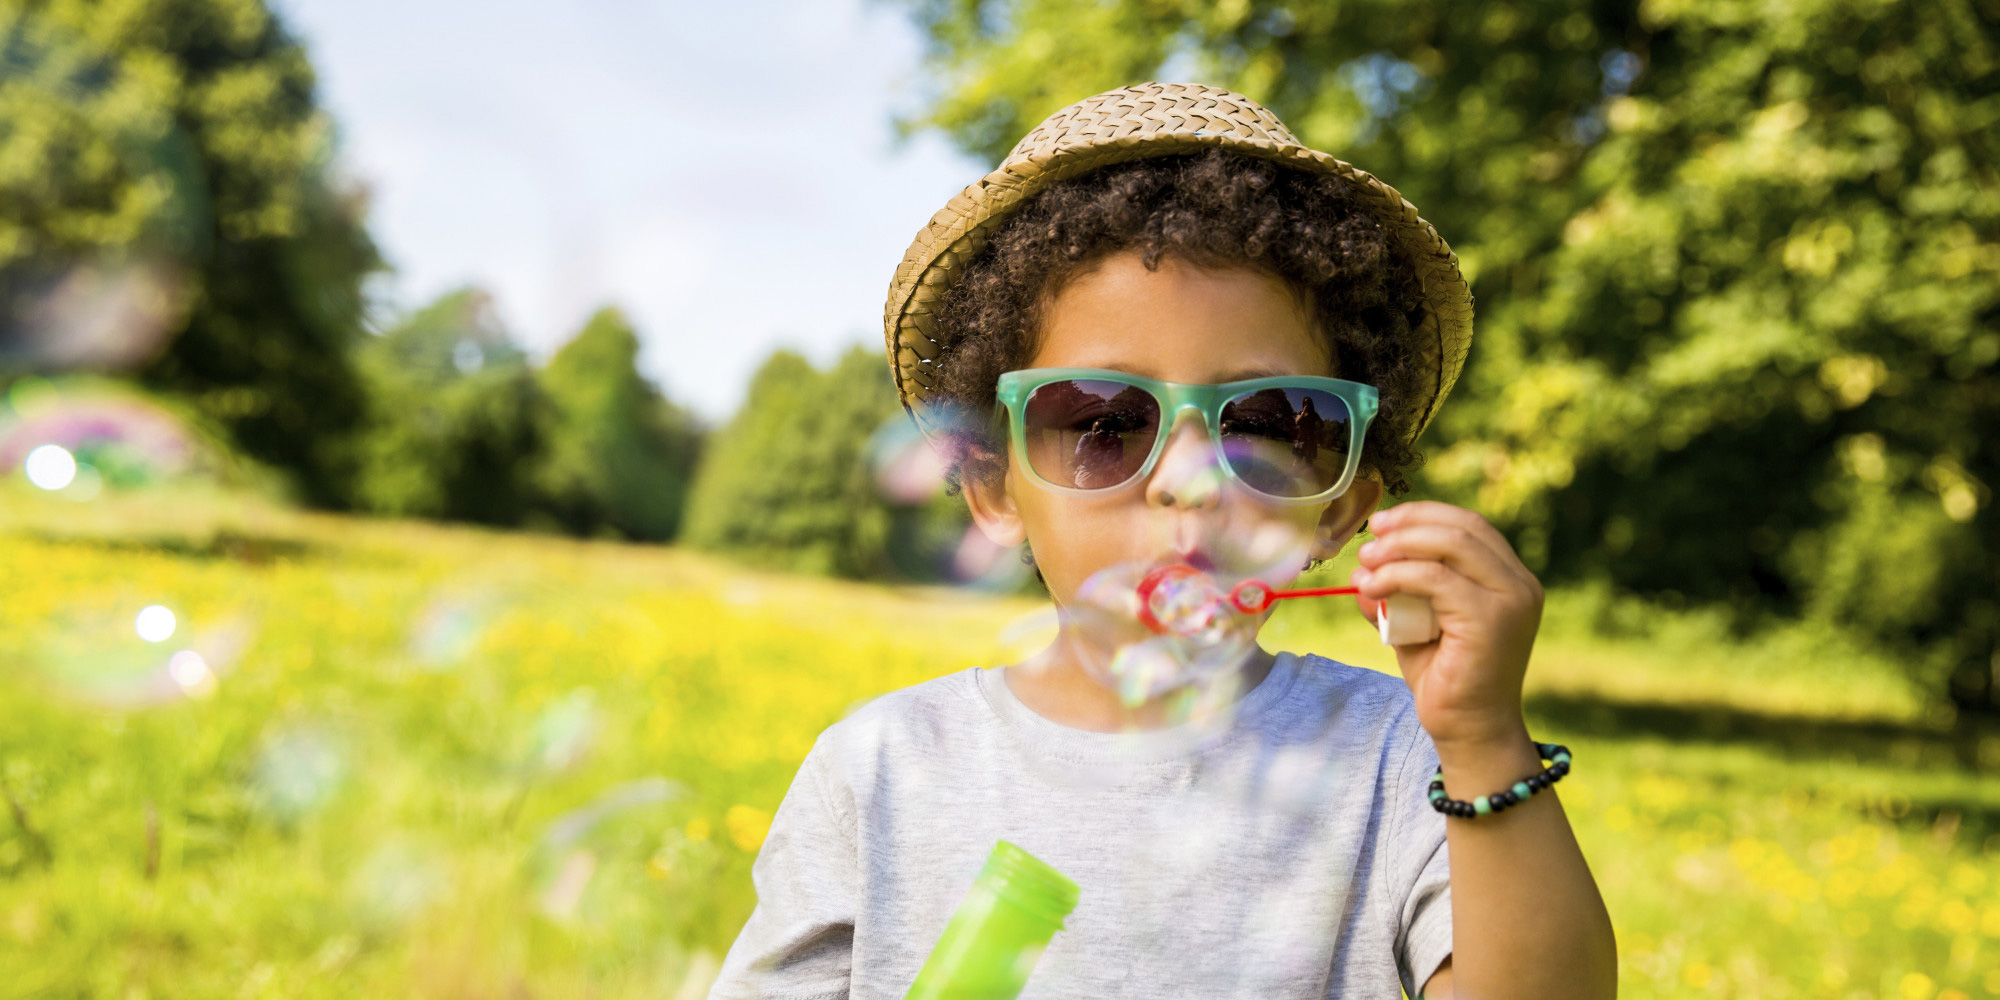 Child wearing a straw hat blowing bubbles